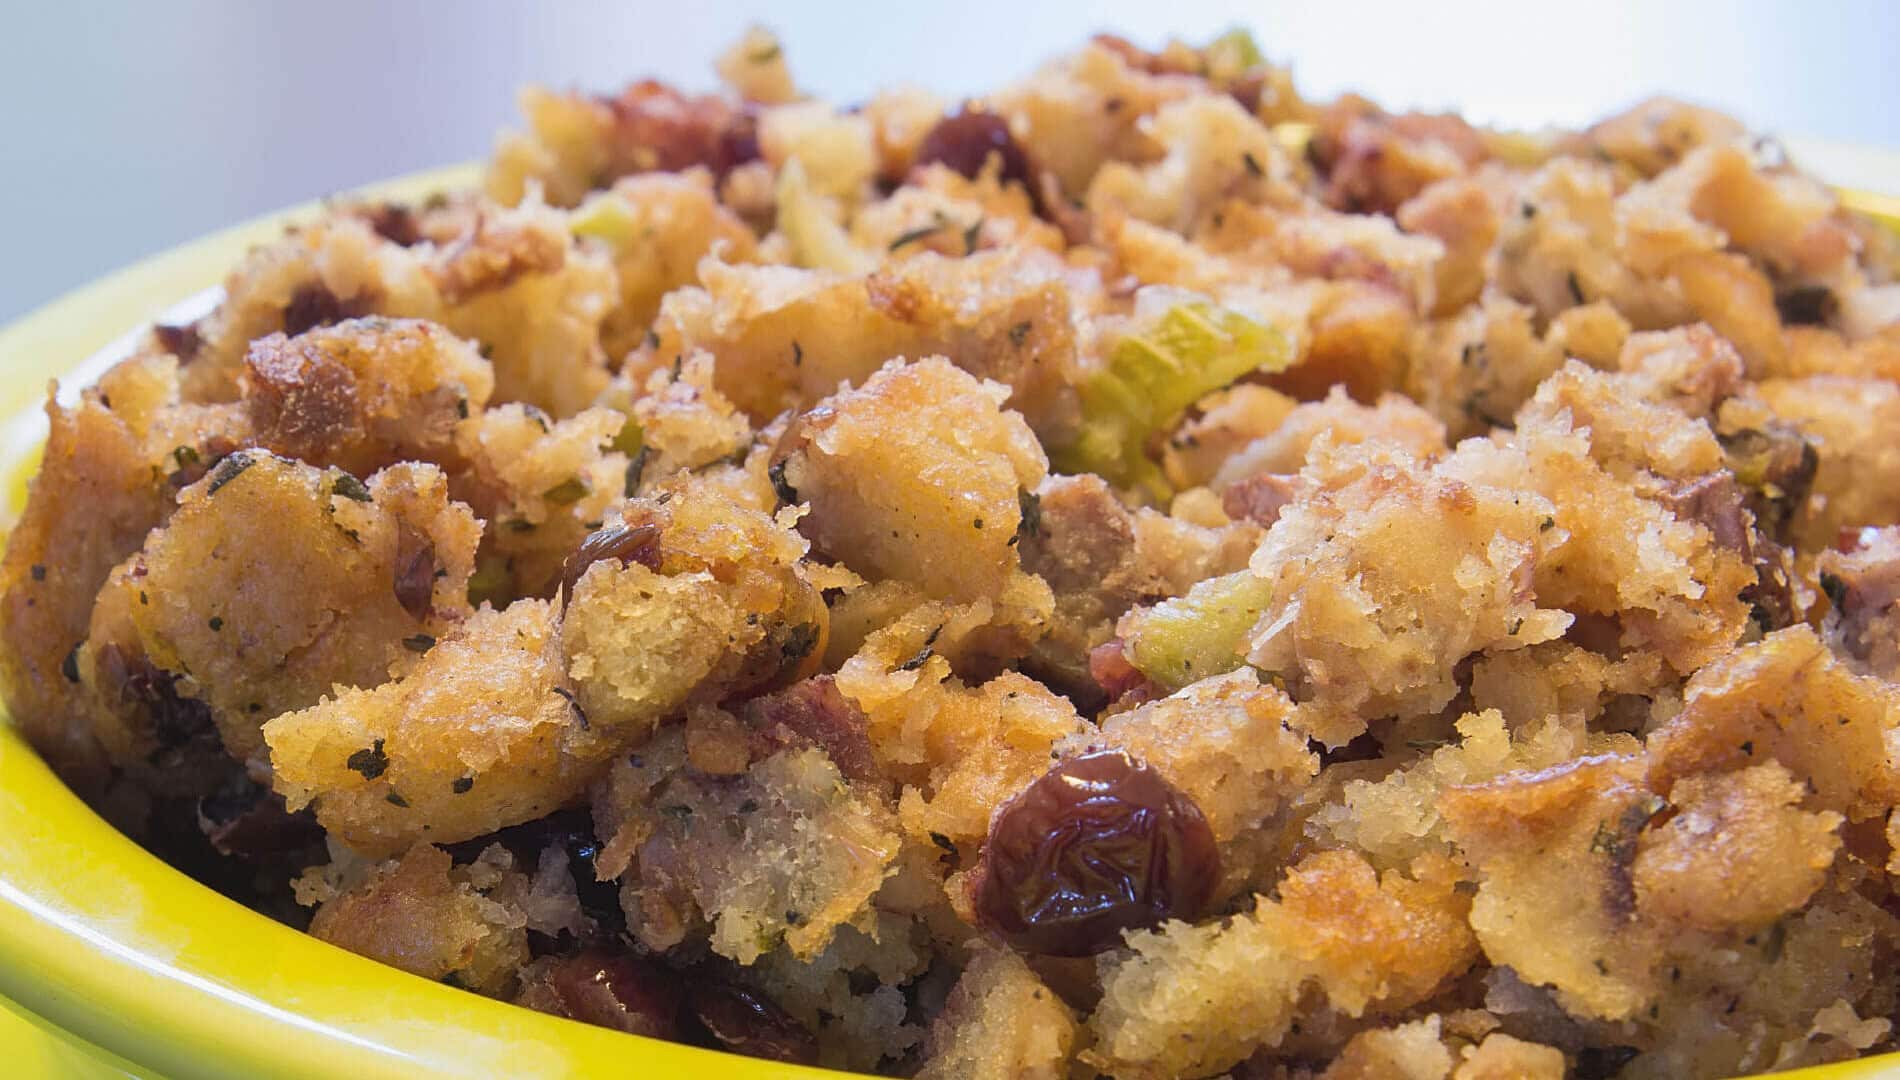 toasted bread stuffing with raisins, celery, onions, carrots, and apples